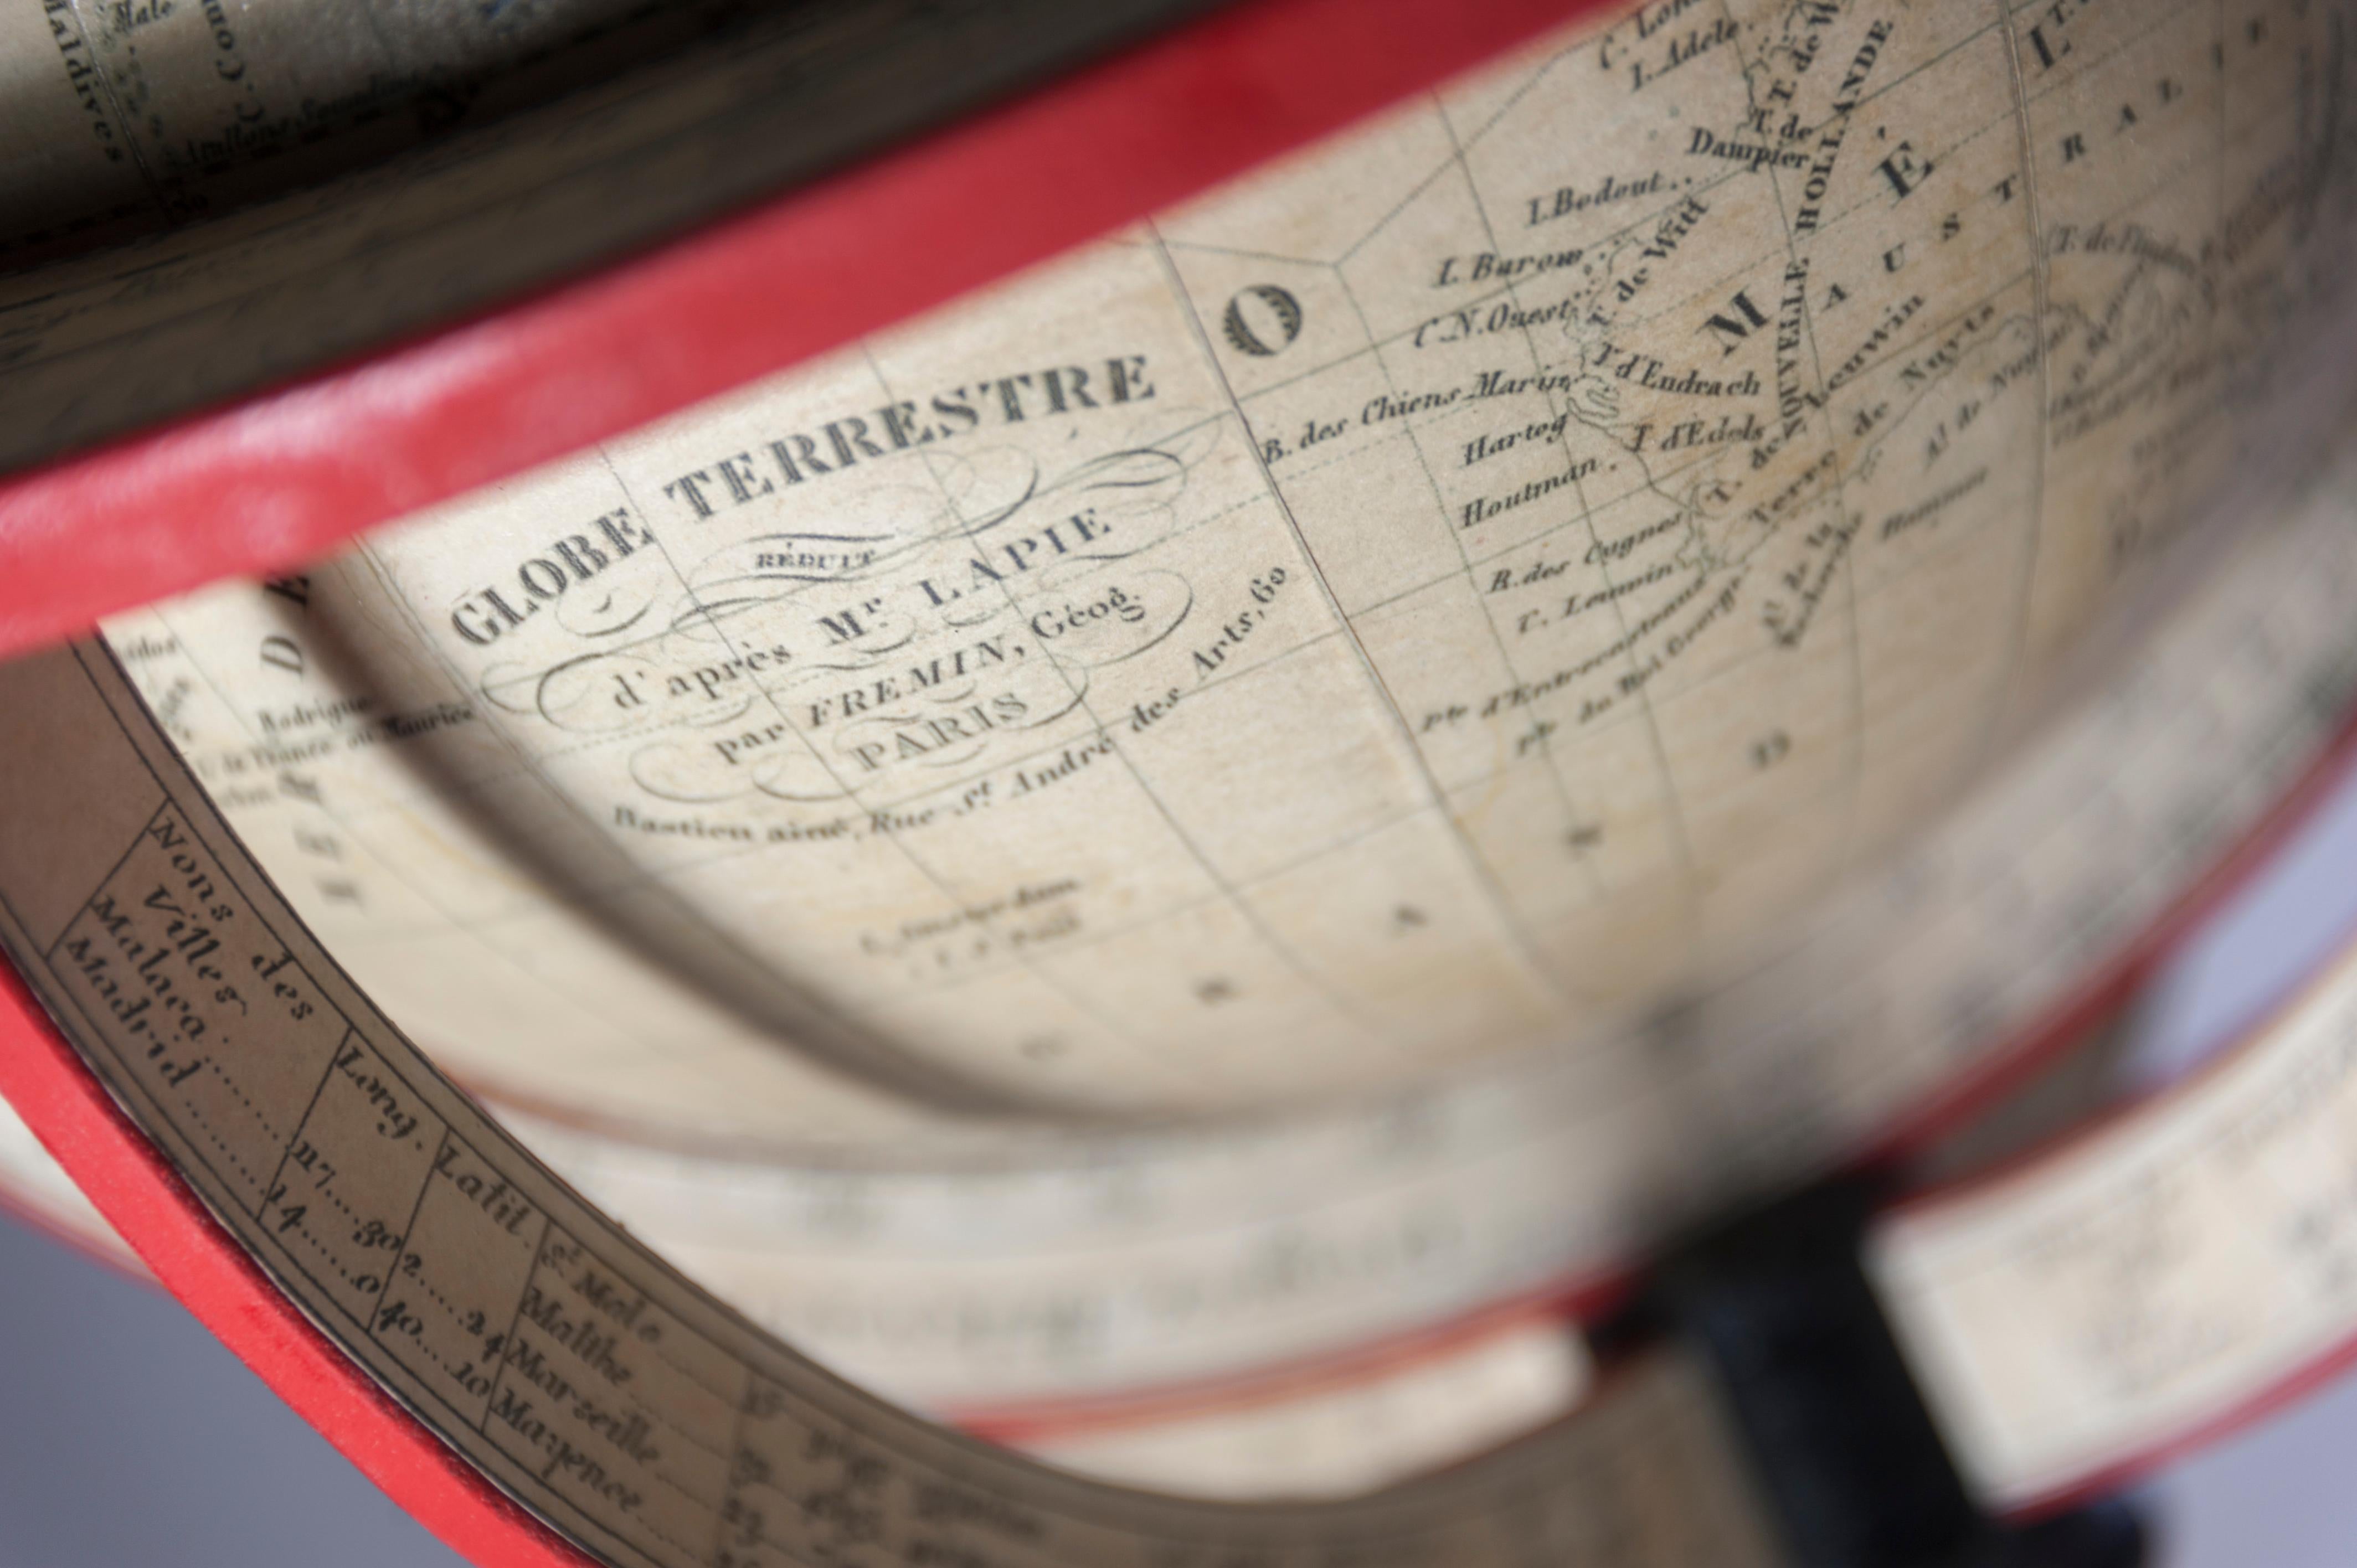 This hand coloured 9 inch terrestrial desk globe is presented on a wooden stand comprising a papered meridian ring which sits inside a horizon ring. The horizon ring is supported by four arms each showing the latitude and longitude of cities and